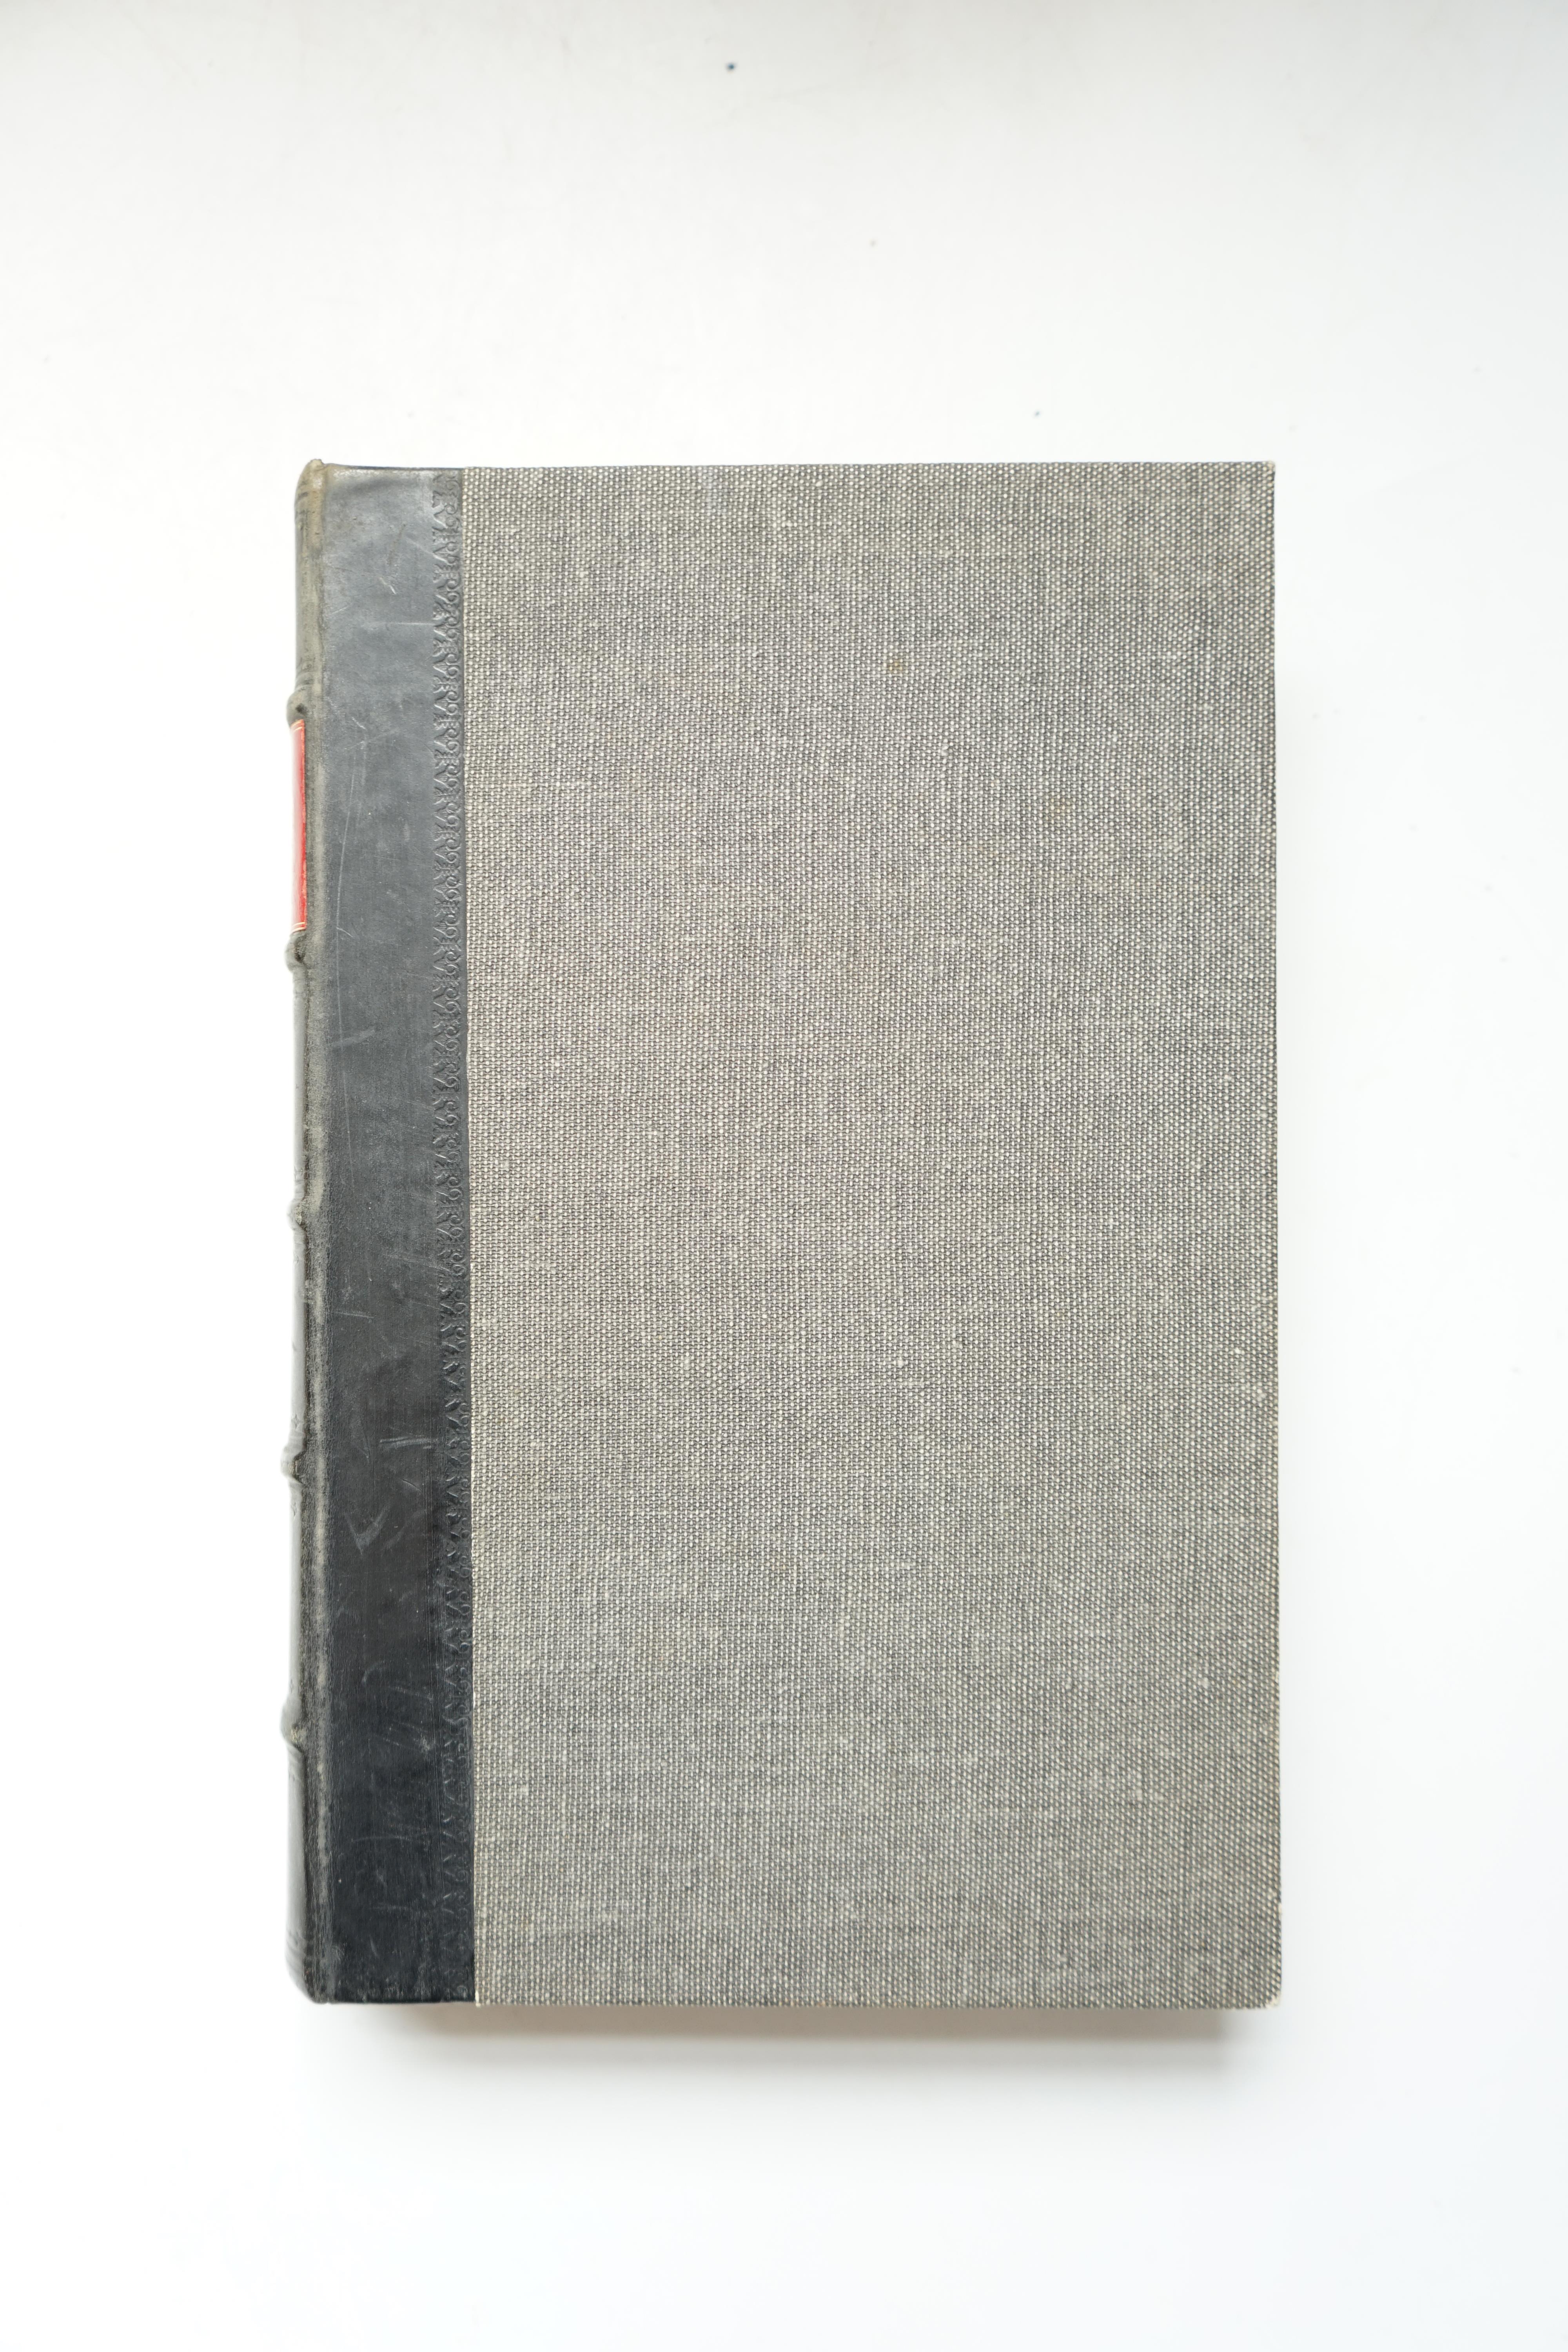 Byron, George Gordon Noel, Lord - Sardanapalus, a tragedy. The Two Foscari, a tragedy. Cain, a mystery, 1st edition, half title, 6 pages of advertisements bound in at beginning, rebound quarter calf, endpapers renewed, J